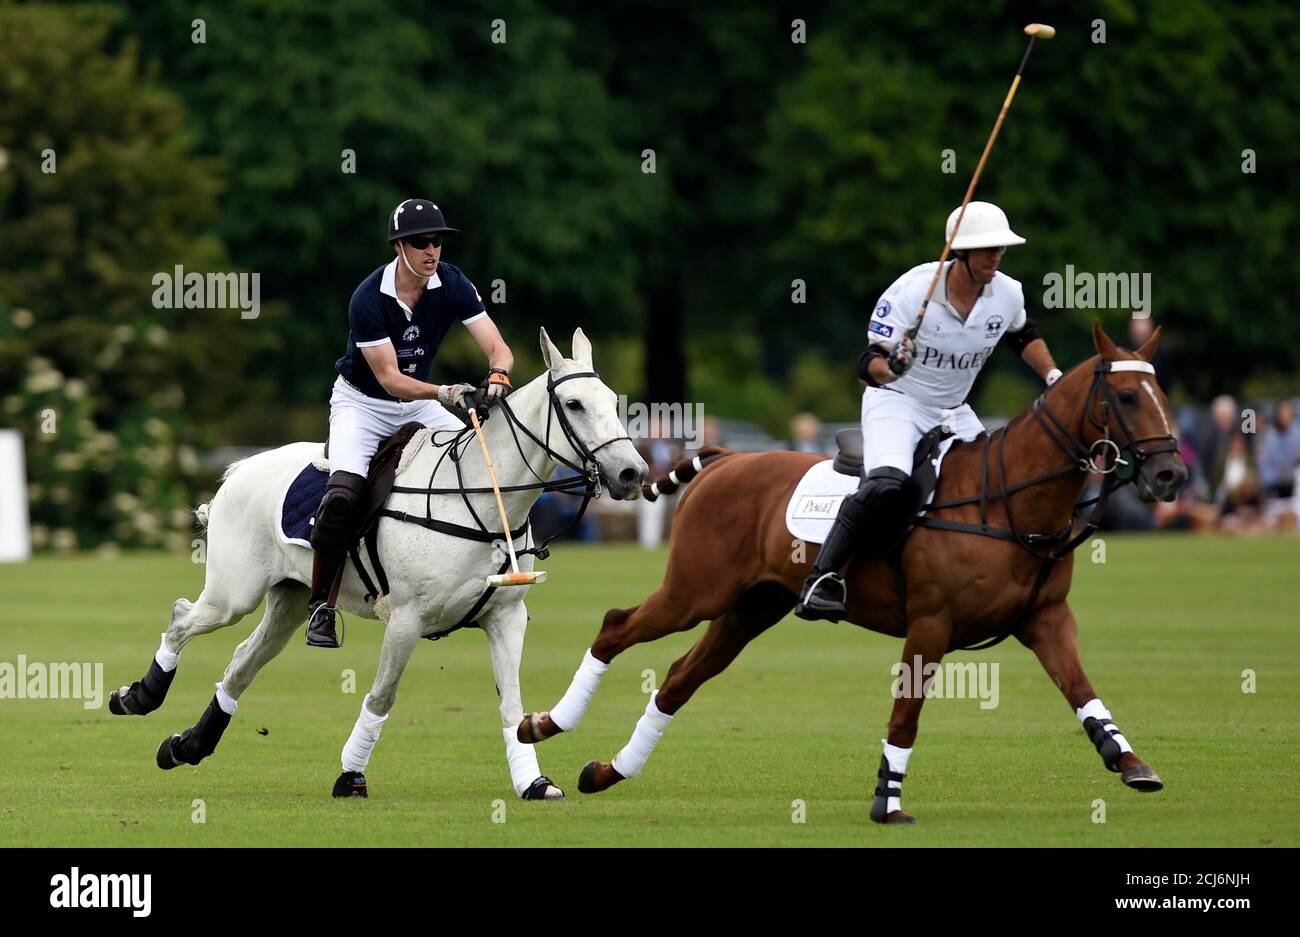 Gloucestershire Festival of Polo - Beaufort Polo Club in Tetbury, Britain  18/6/16. Britain's Prince William in action. REUTERS/Adam Holt Stock Photo  - Alamy